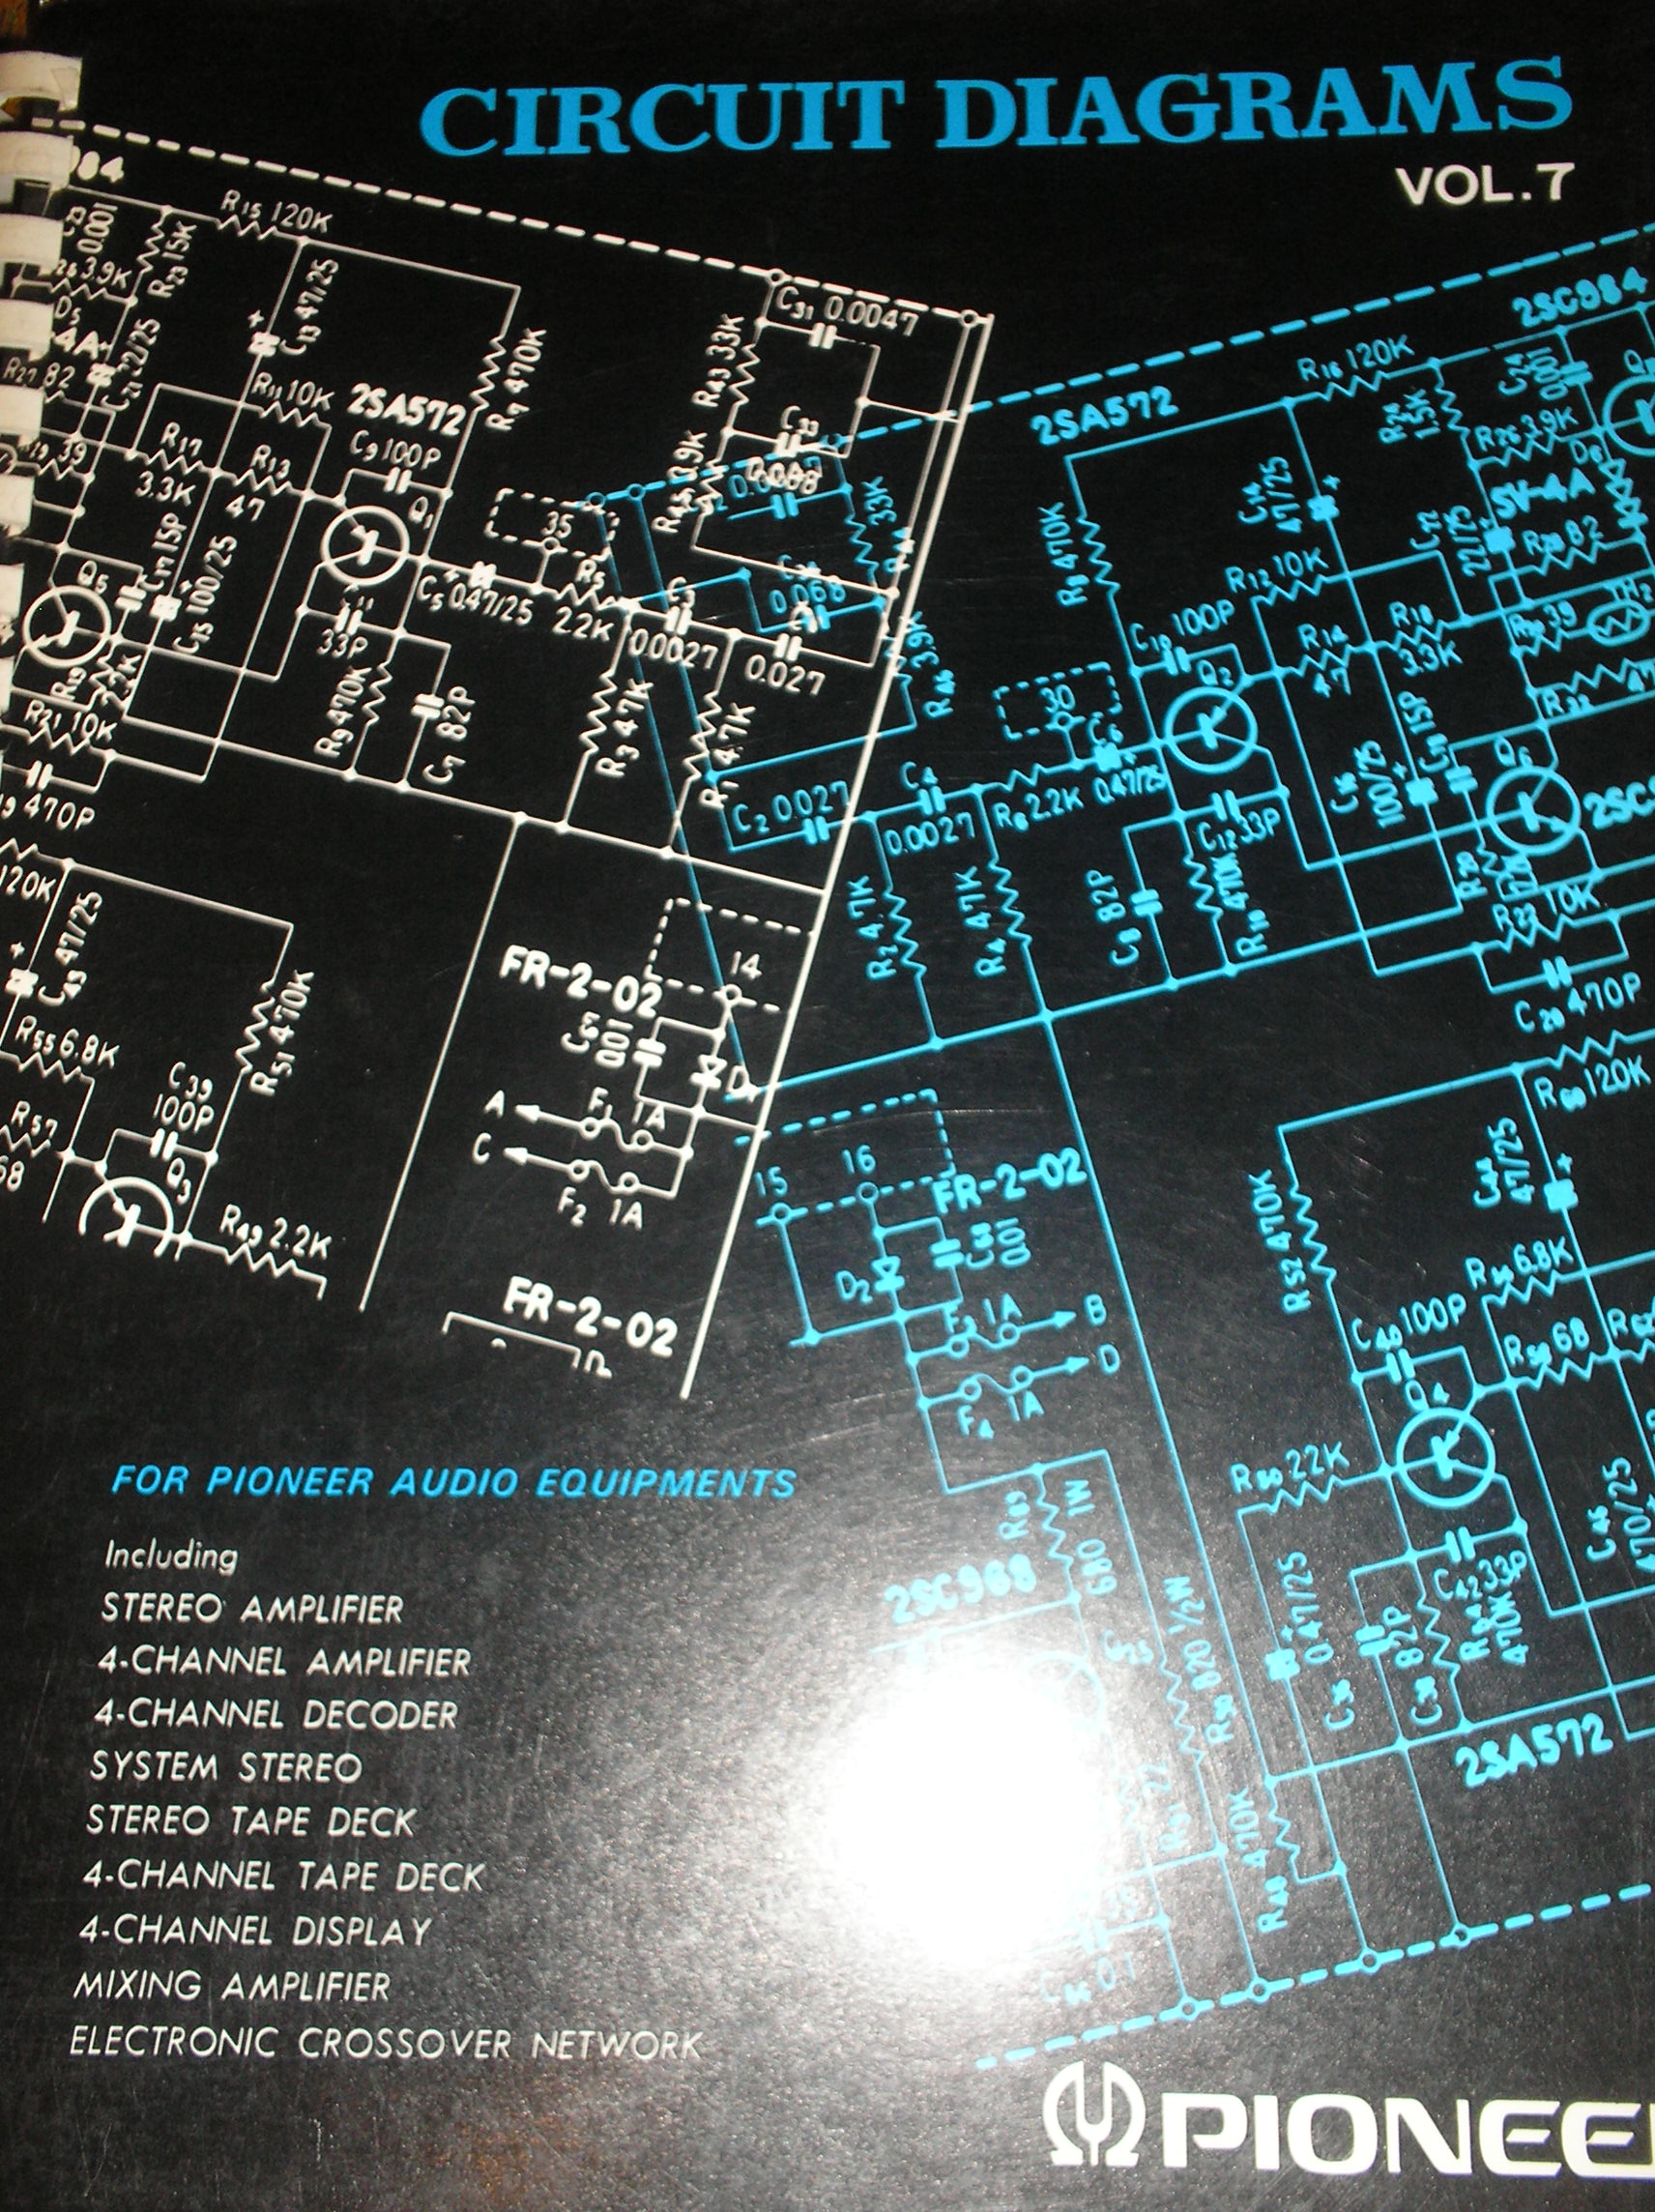 3000 Rondo Stereo System fold out schematics.   Book 7